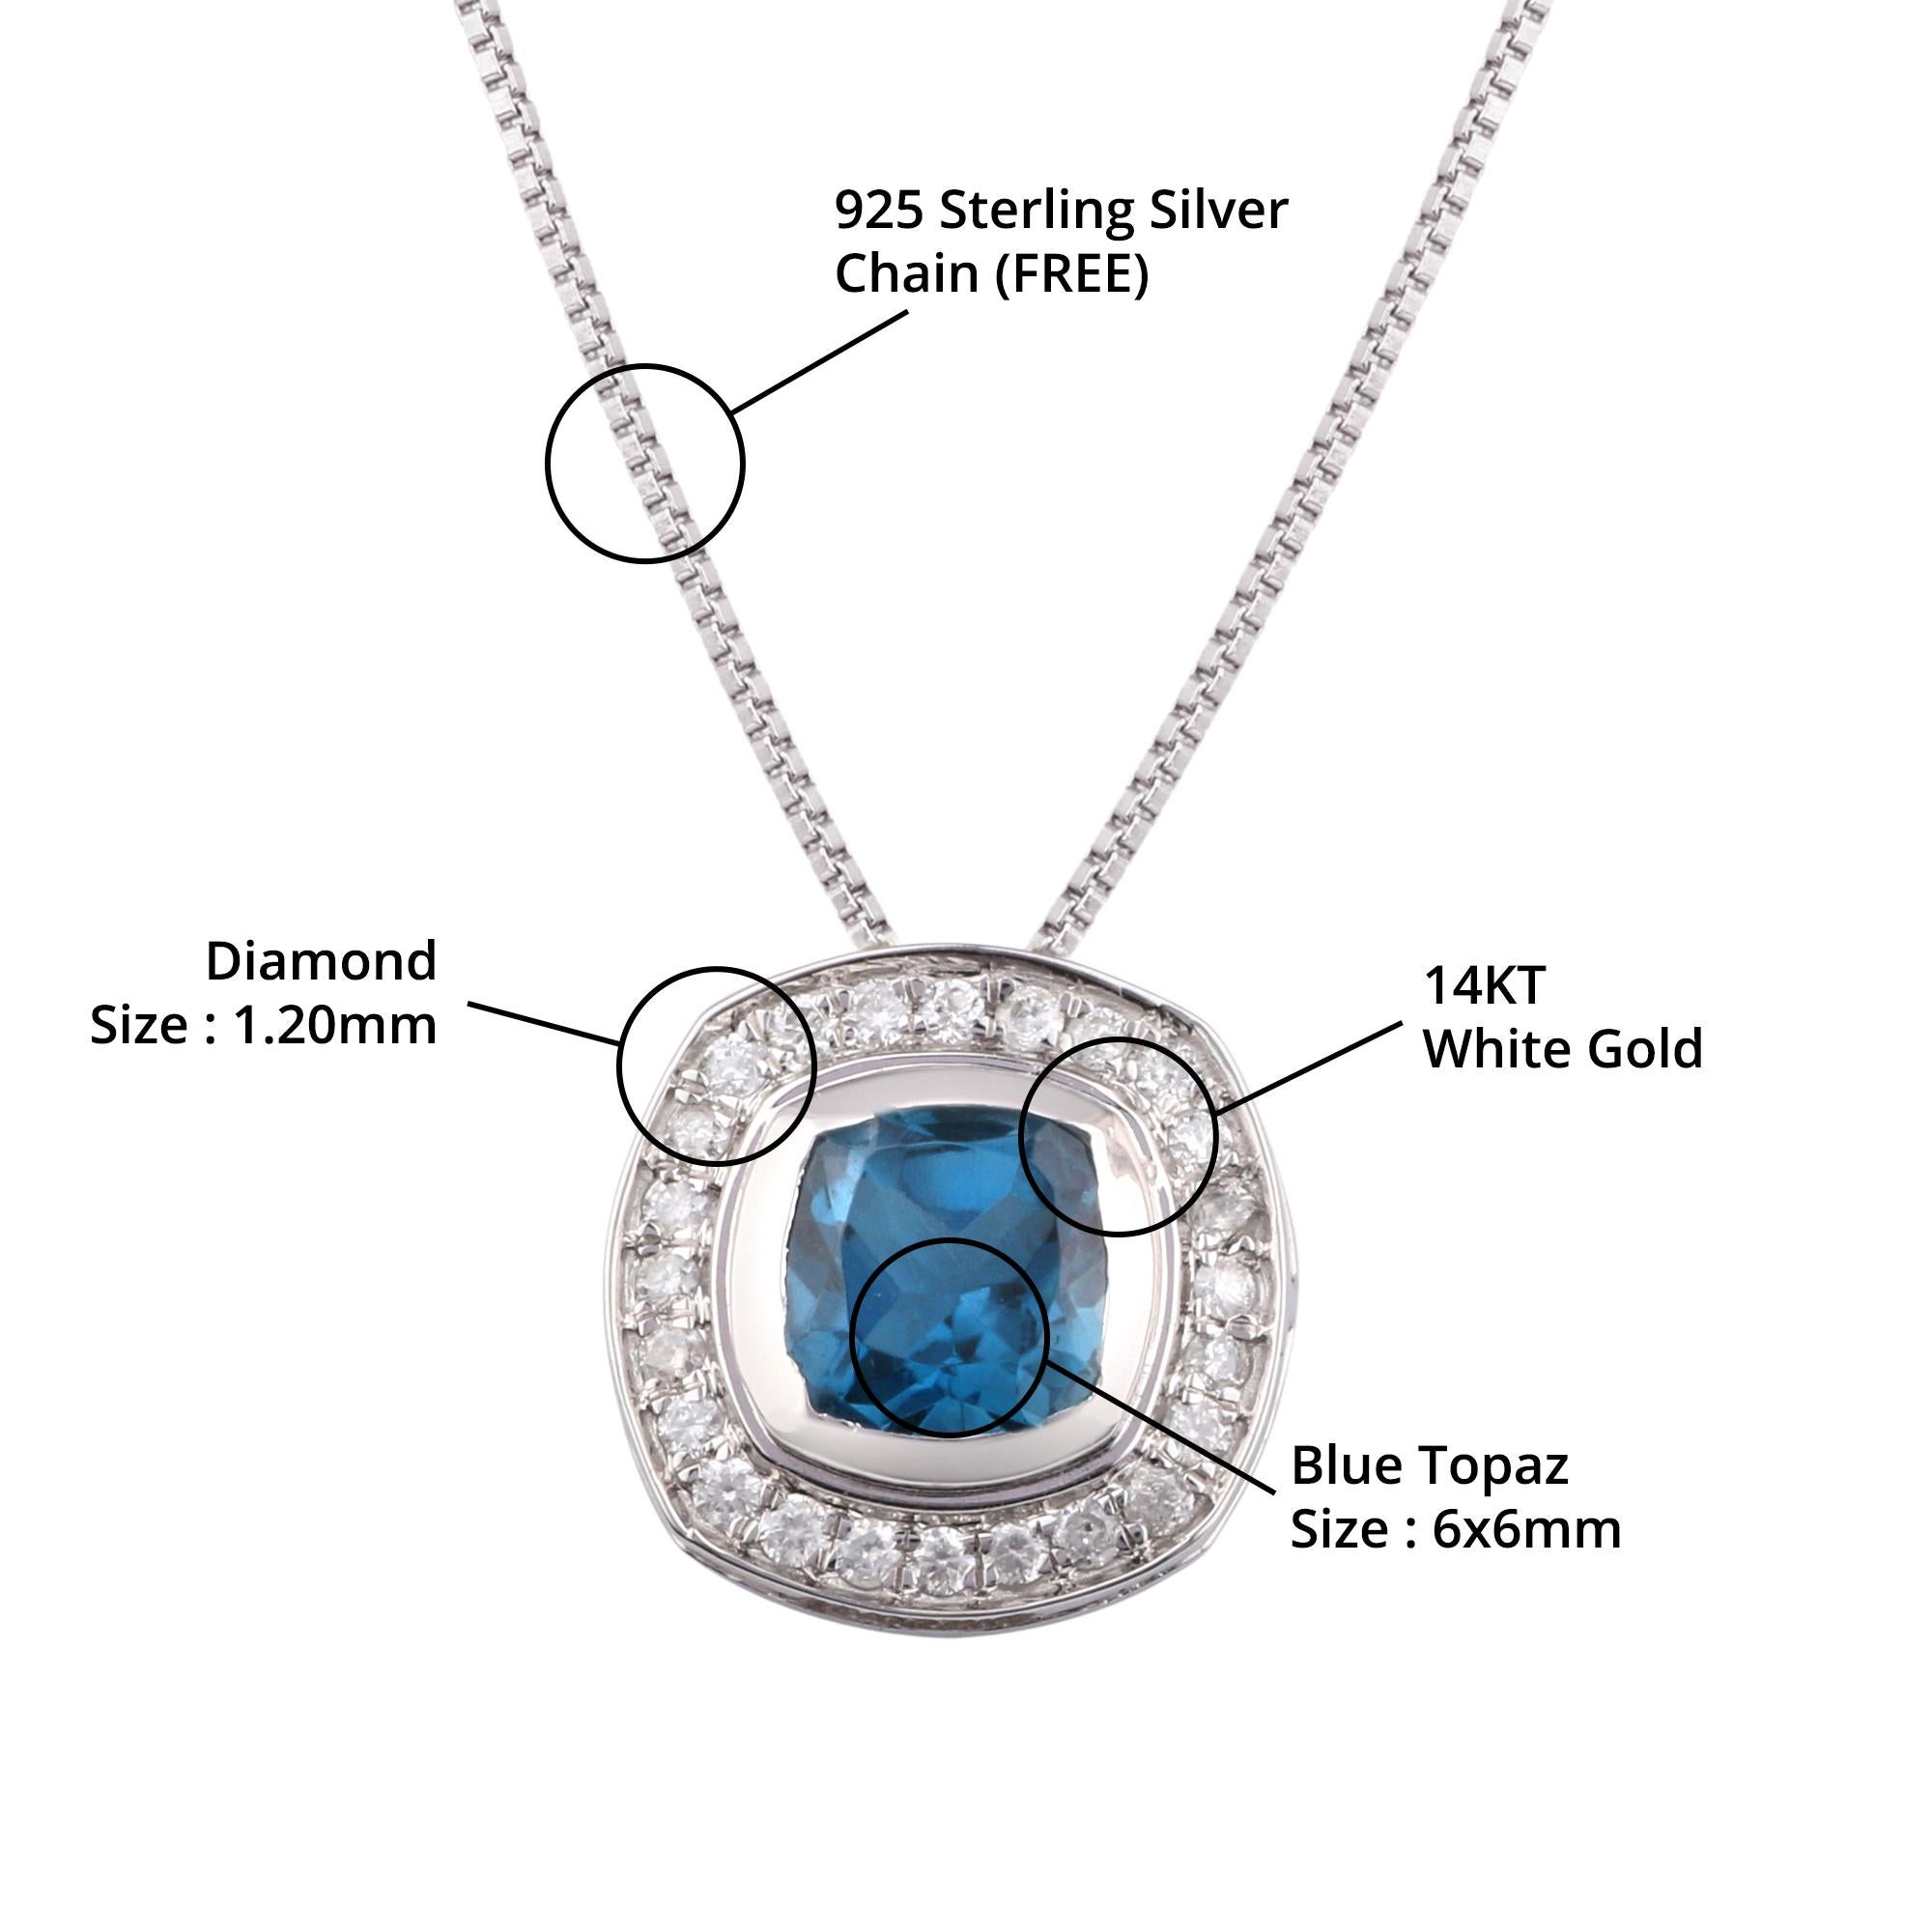 Item details:-

✦ SKU:- JPD00155WWW

✦ Material :- Gold

✦ Metal Purity : 14K White Gold

✦ Gemstone Specification:- 
✧ Clear Diamond Round (l1/H1) - 1.20mm - 24 Pcs
✧ Natural Blue Topaz Cushion - 6x6mm - 1 Pcs


✦ Approx. Diamond Carat Weight :